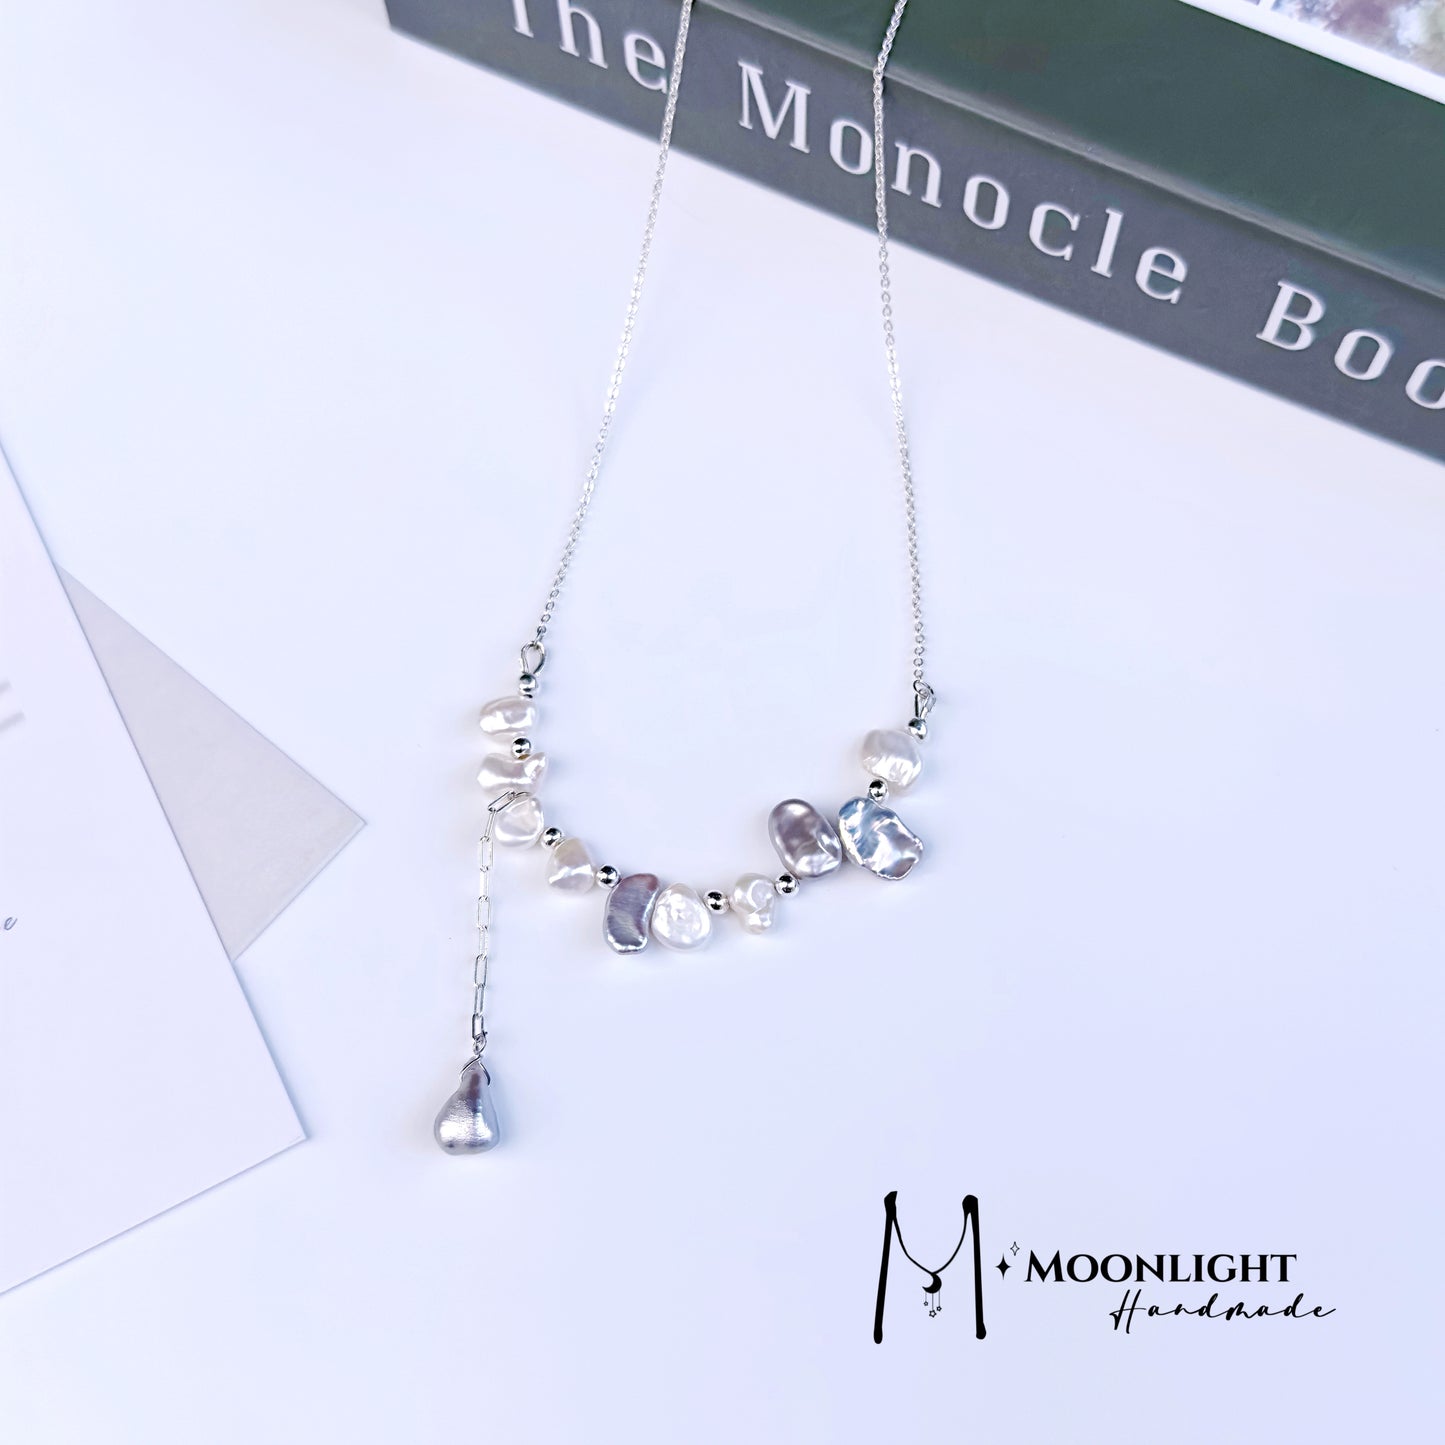 【MmoonlightHandmade】Two Ways To Wear, A Unique Baroque Pearl Necklace